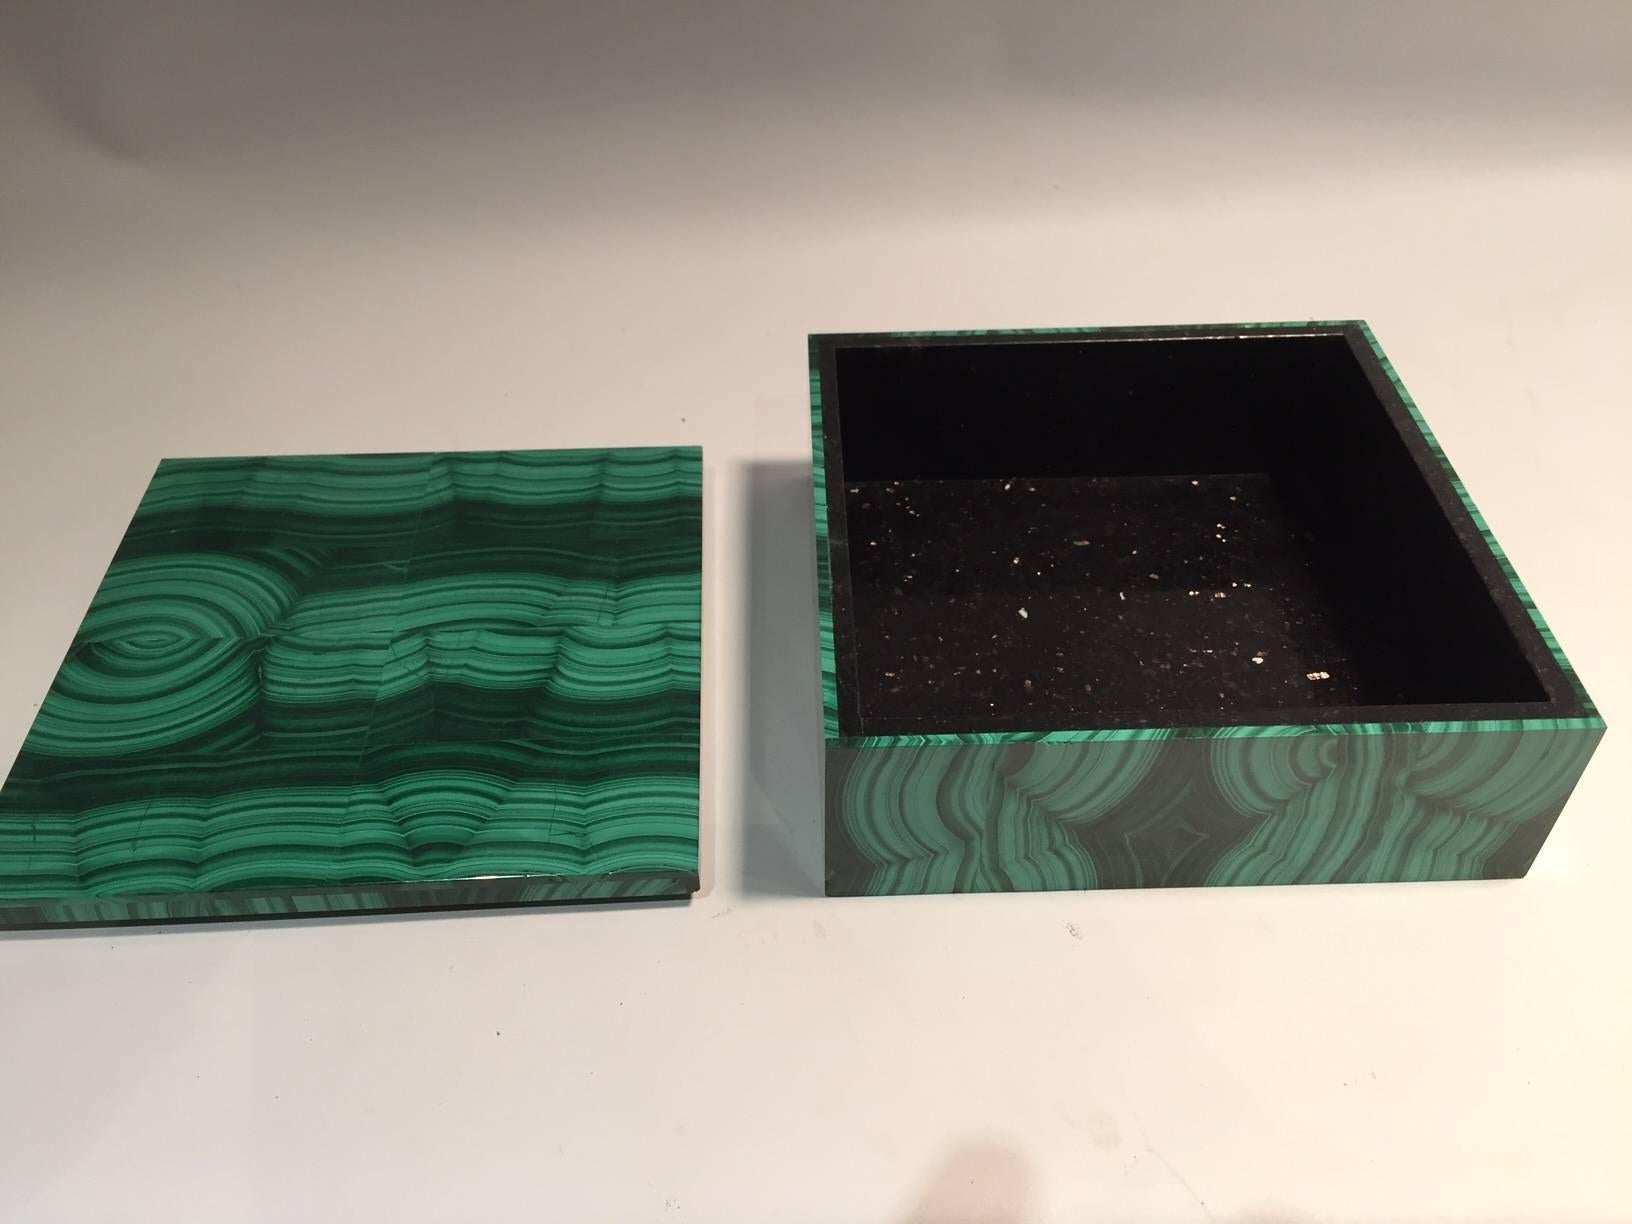 The malachite for this box was sourced from the Congo, where the finest quality of this mineral is currently found. The malachite for this box was sent to India where the stone was cut and the box was assembled. Malachite from the 18th and 19th